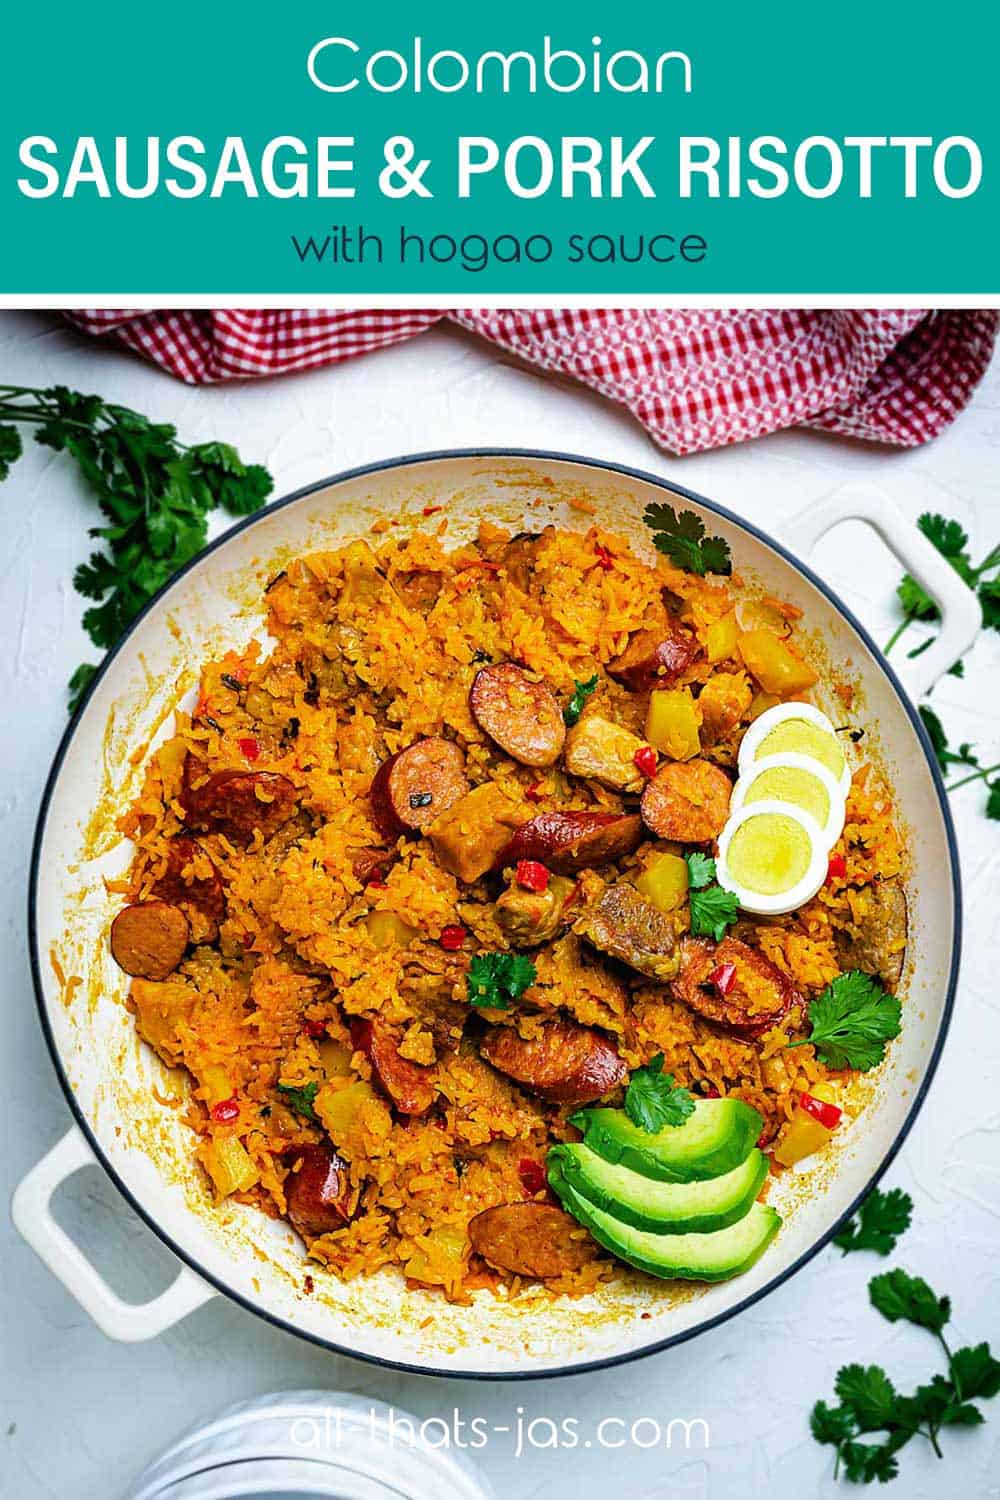 A dish with Colombian recipe of rice, pork, and sausage with text overlay.